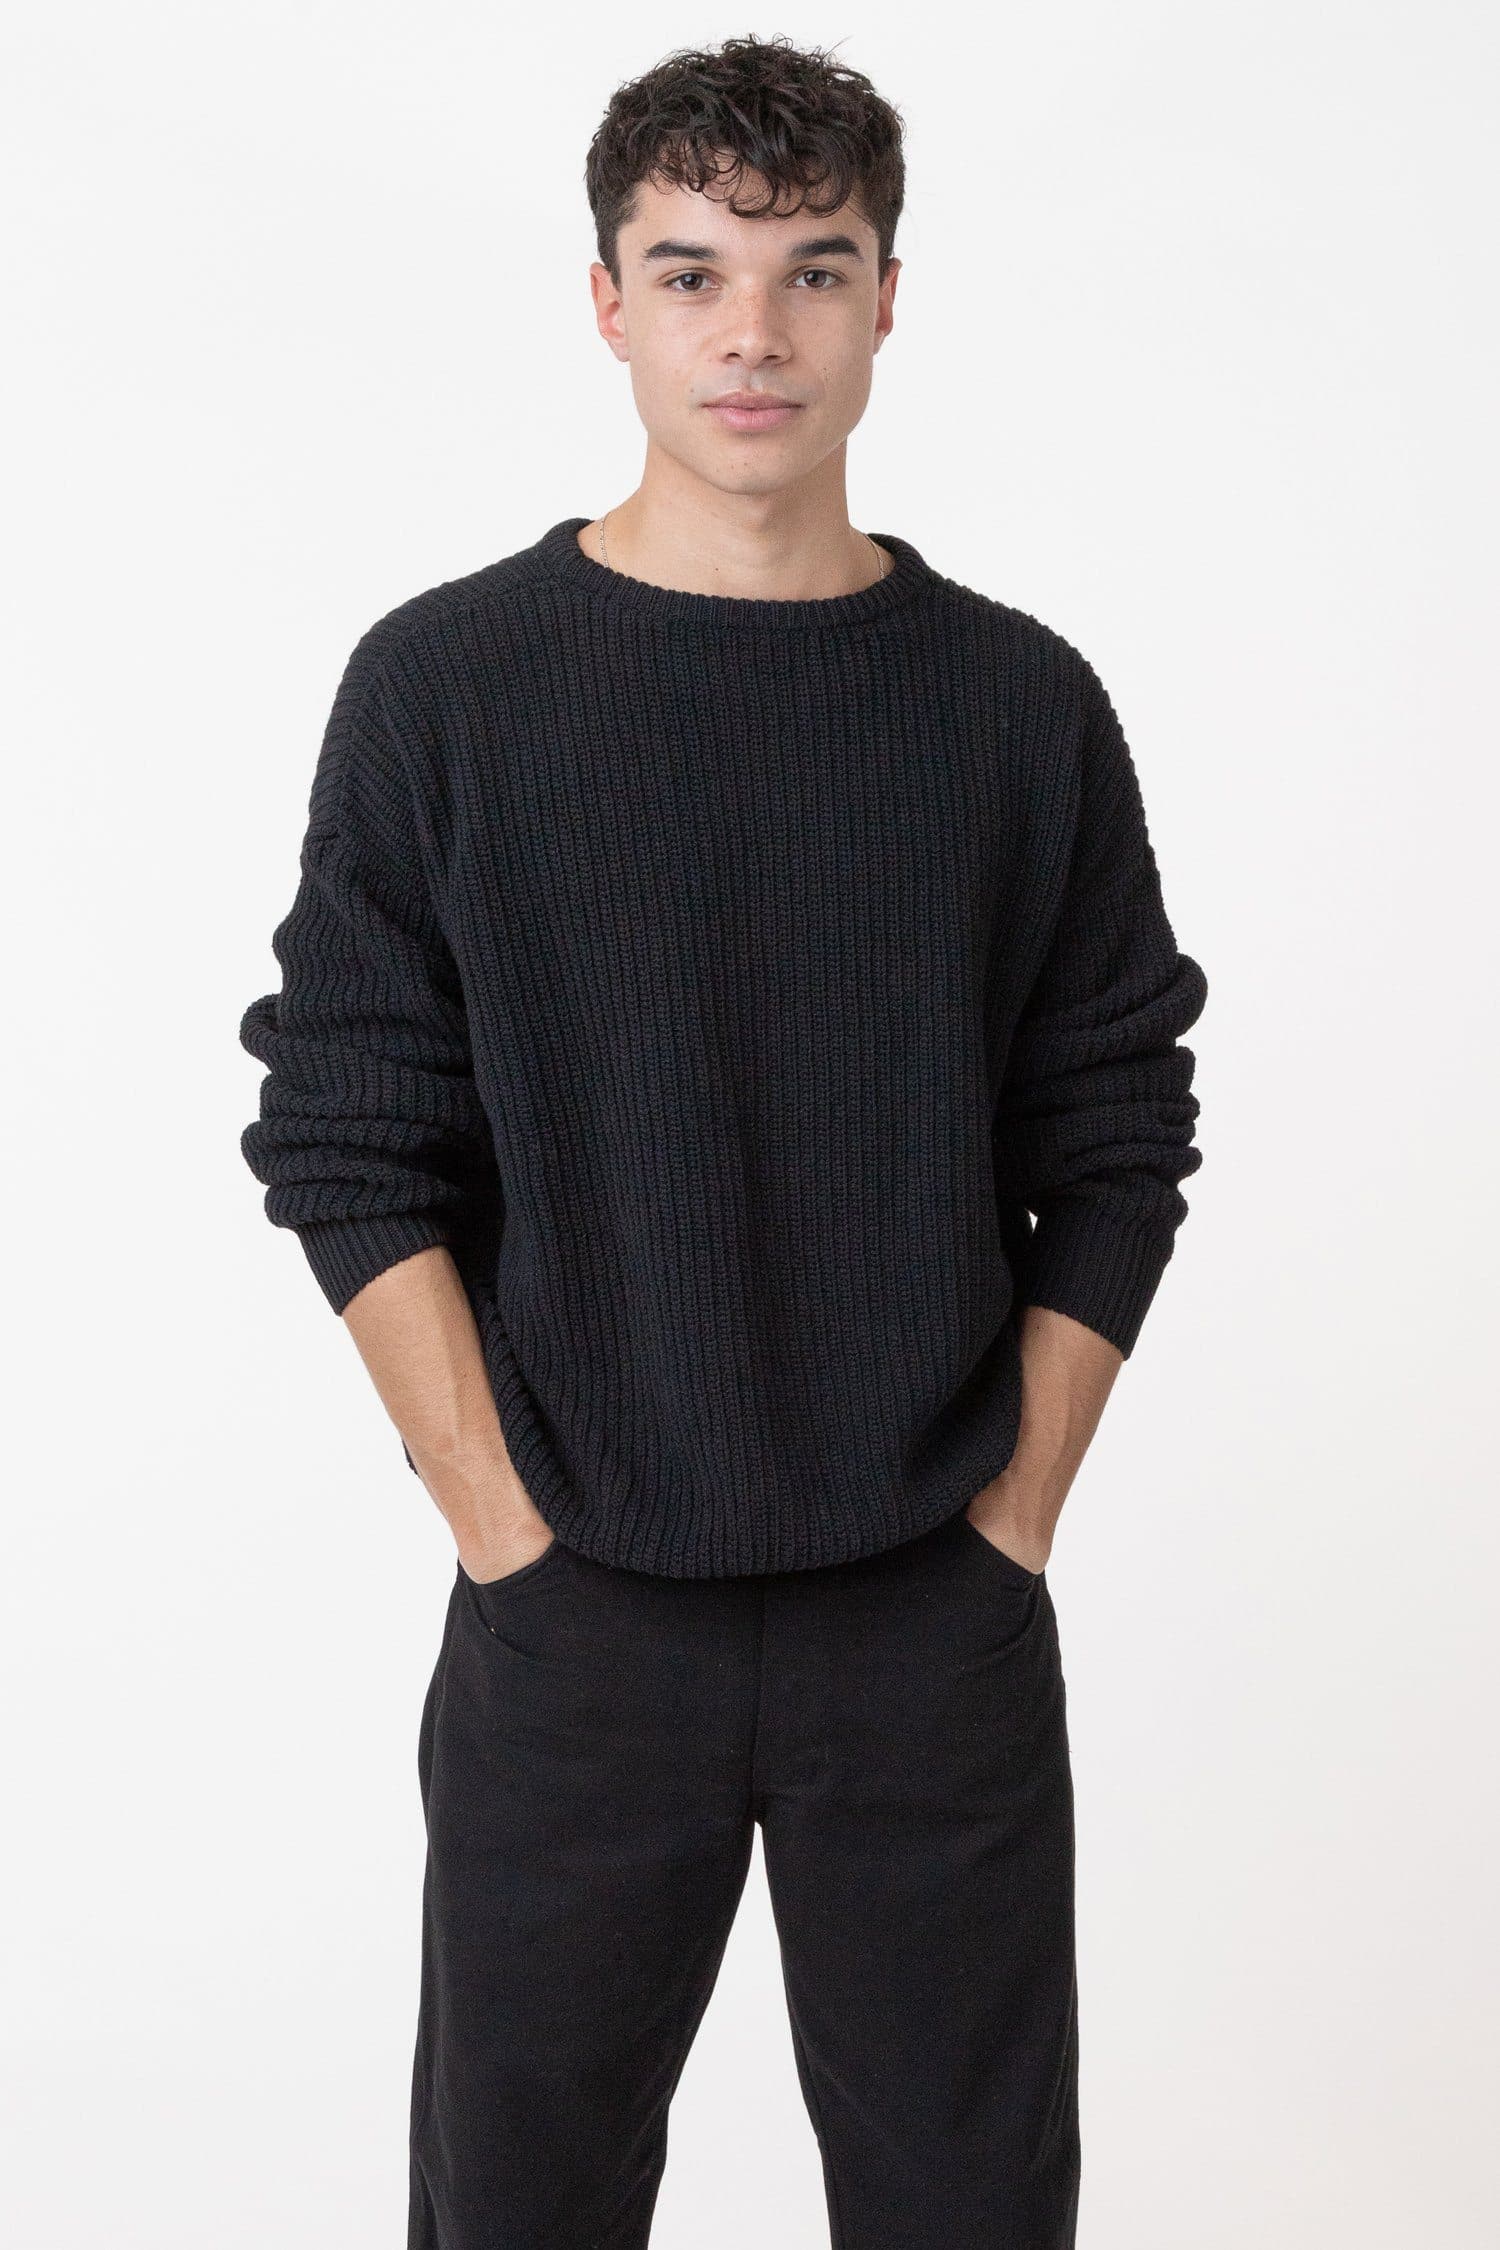 Weekday Jumpers - Men - 16 products